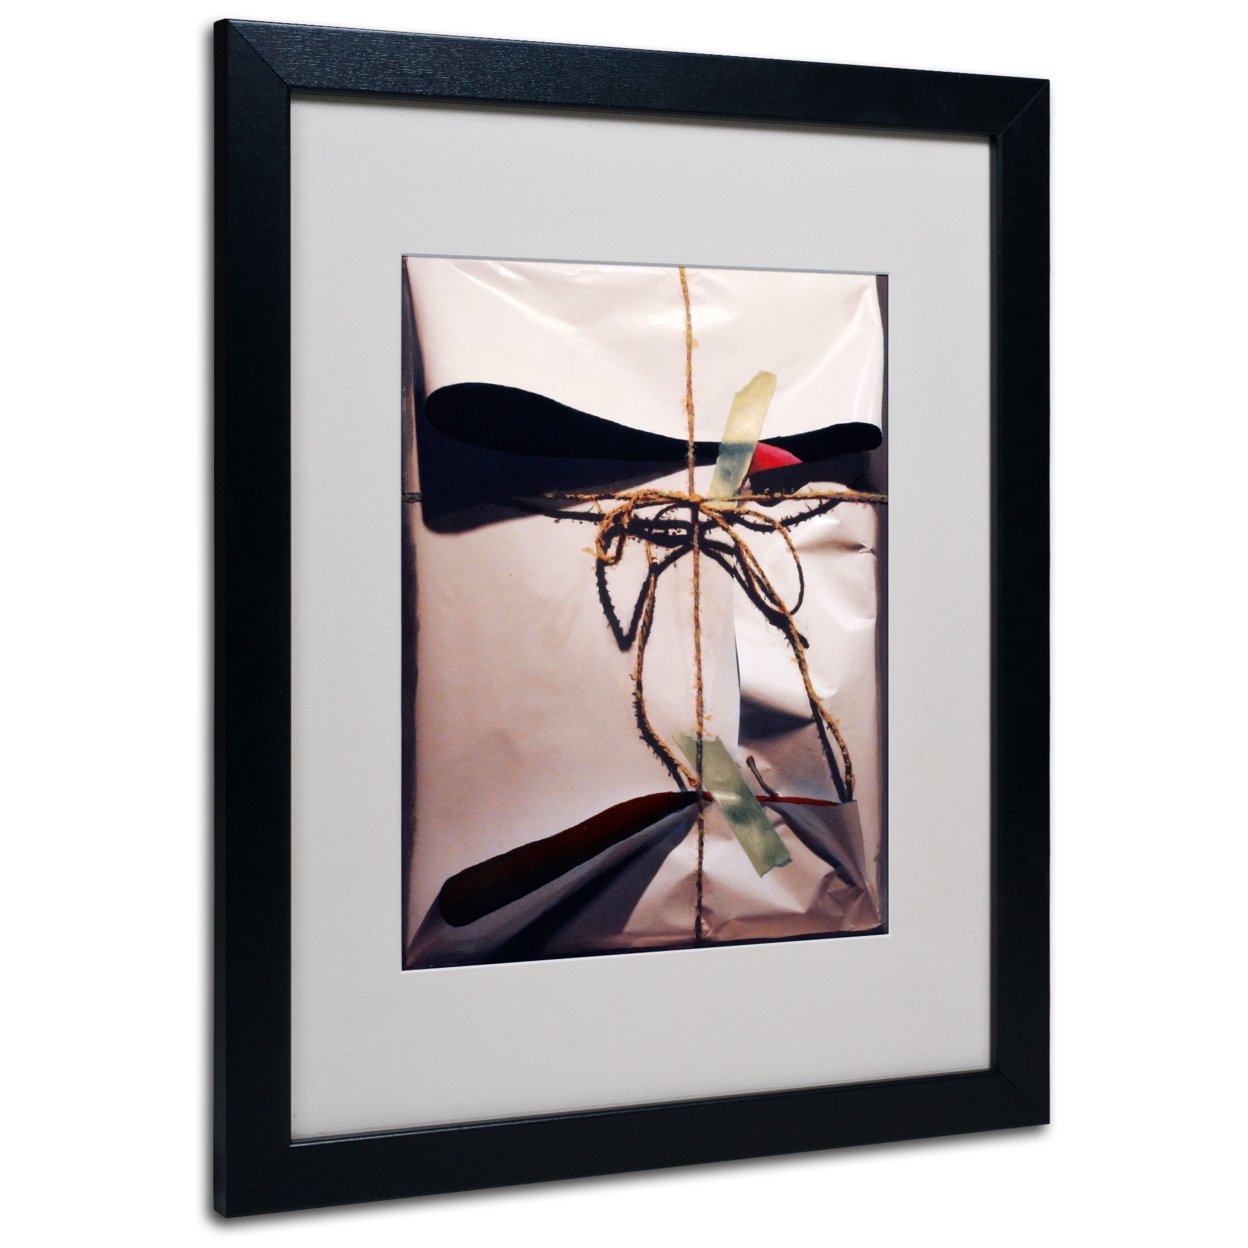 Roderick Stevens 'White Wrap With Twine' Black Wooden Framed Art 18 X 22 Inches